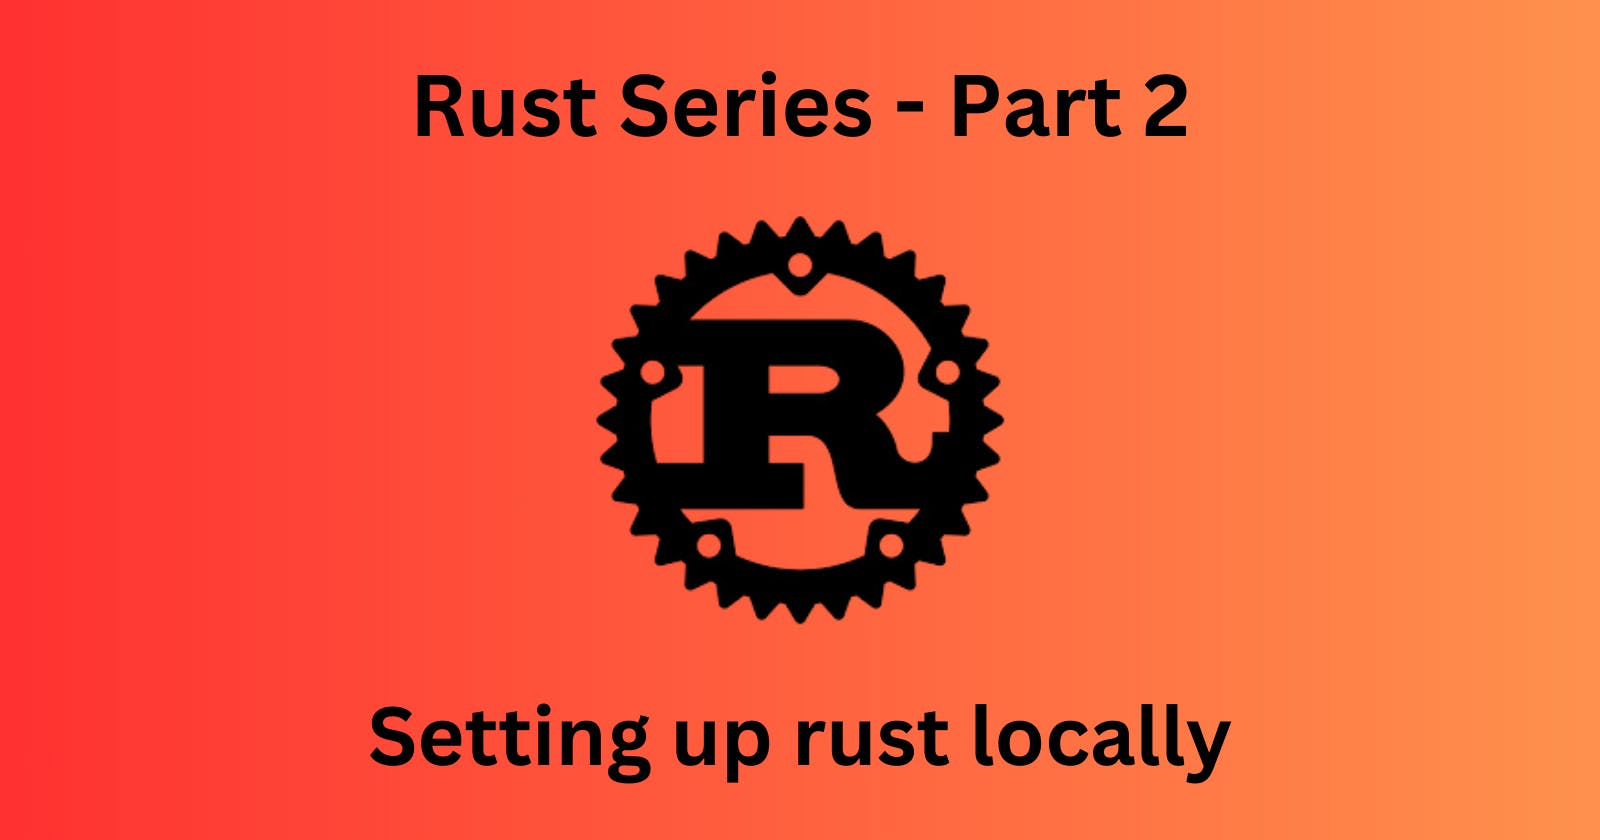 Setting up rust locally - Rust Series Part 2